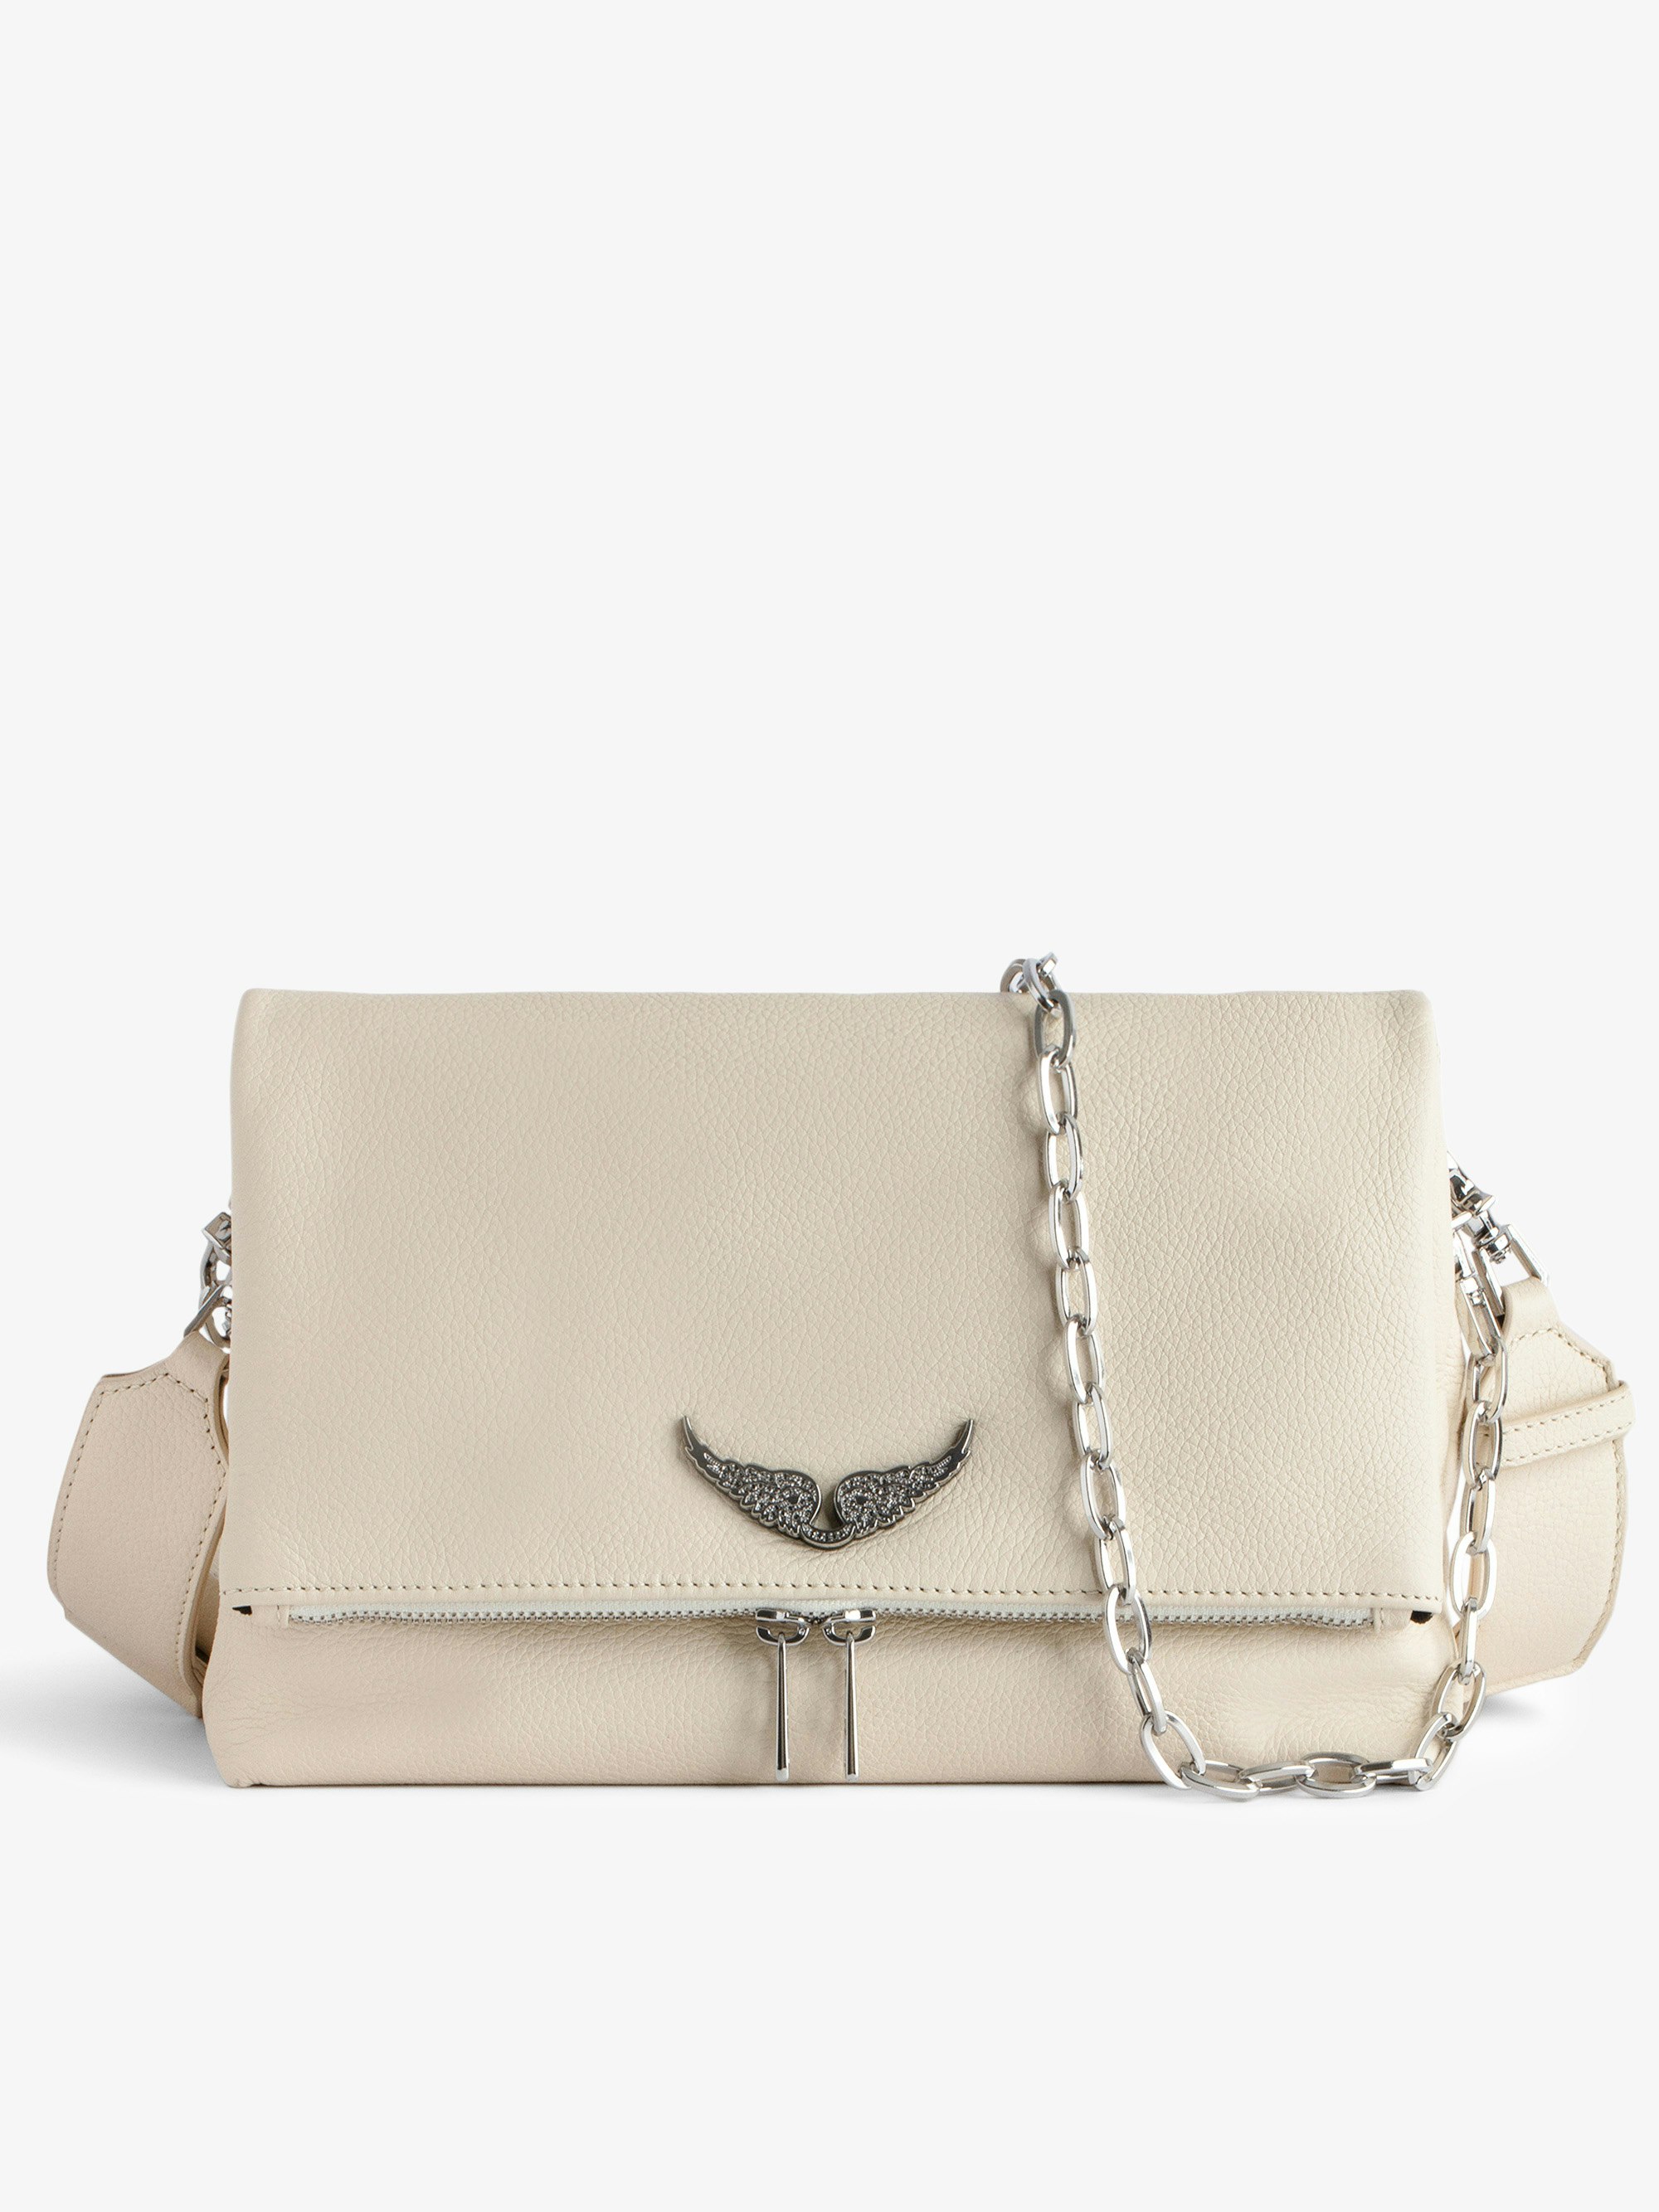 Swing Your Wings Rocky Bag - Women’s white leather Rocky bag with silver-toned metal shoulder strap